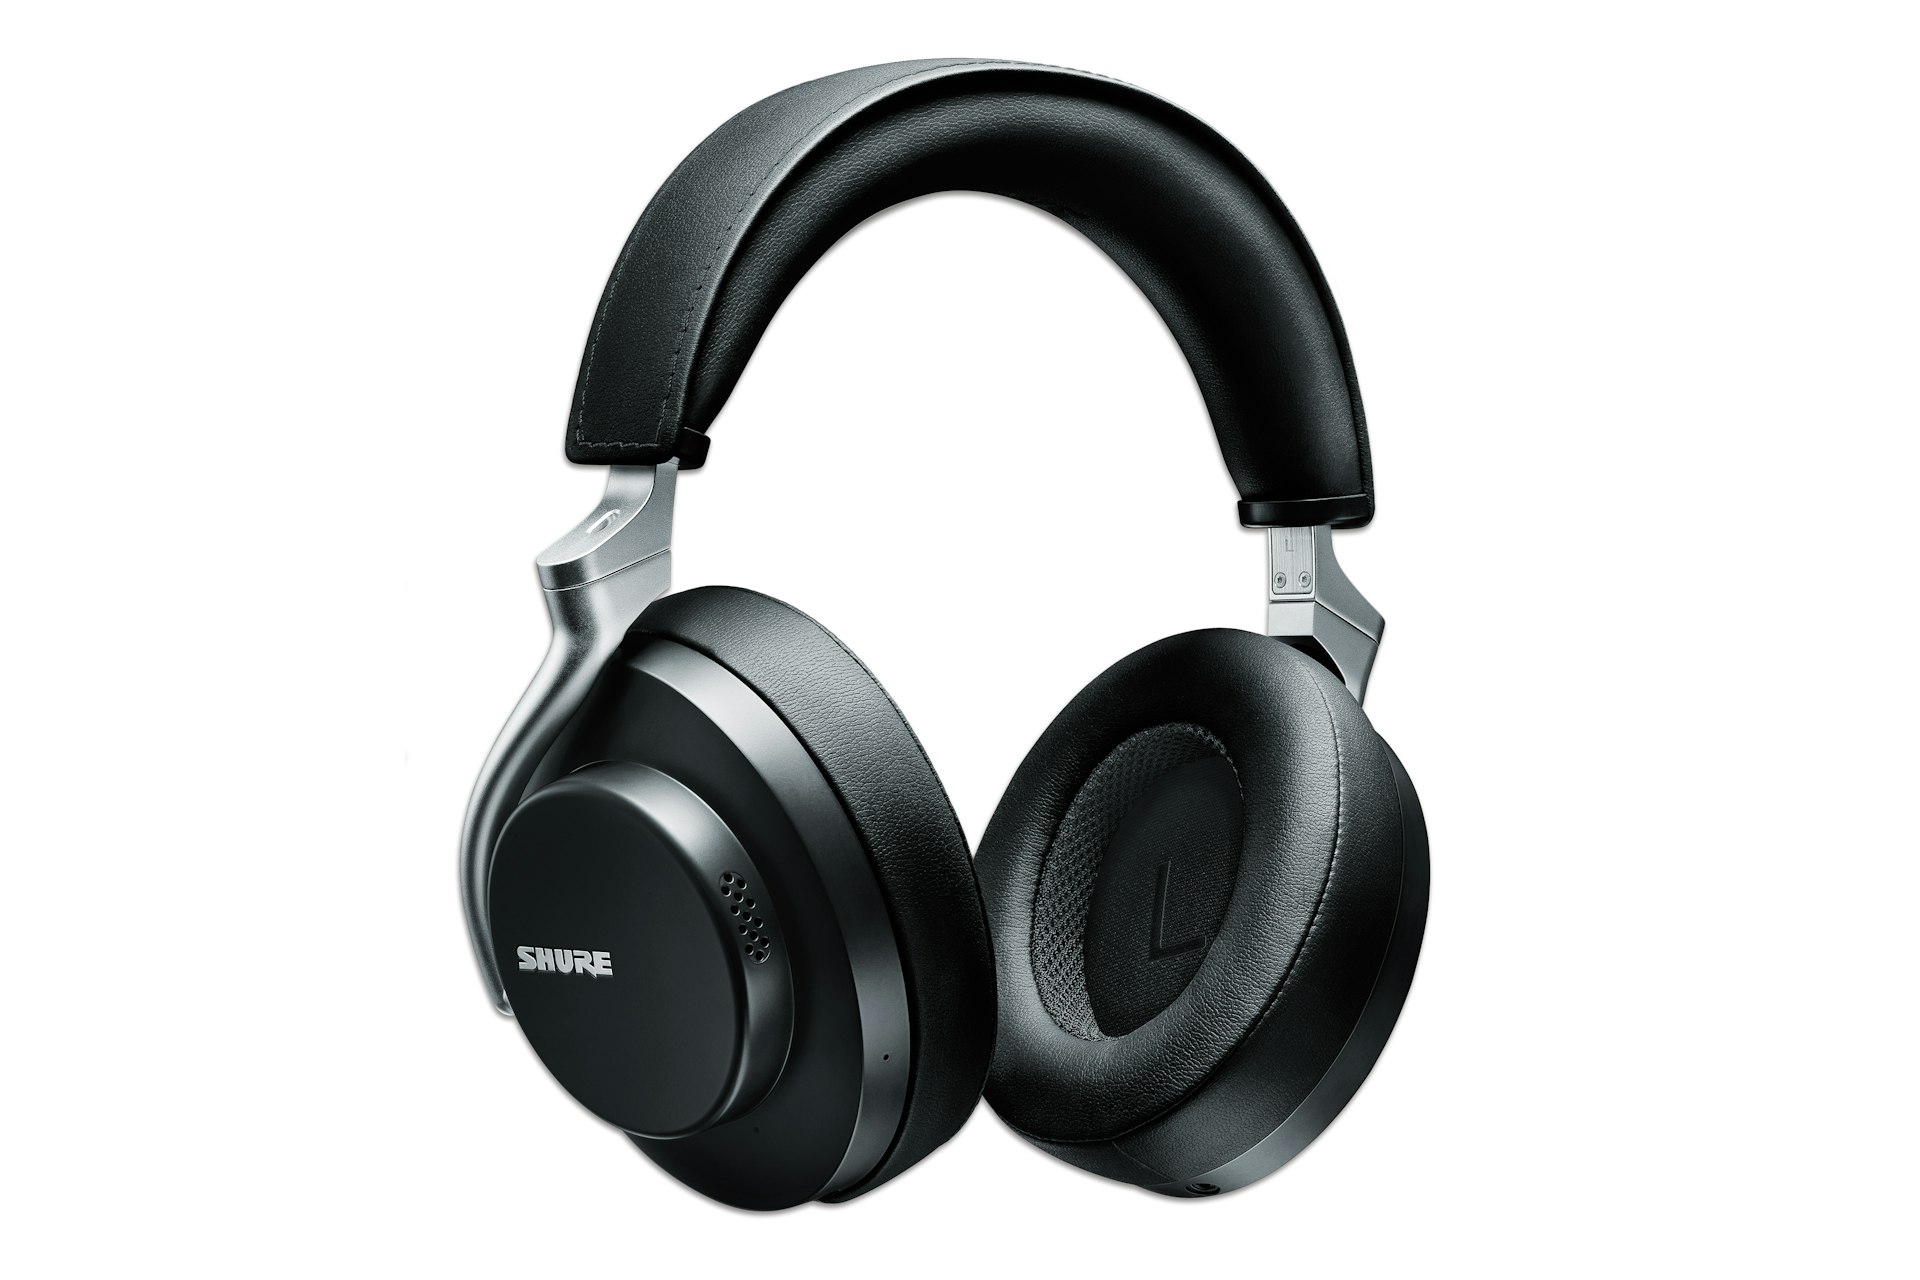 Product shot of a pair of Shure headphones.